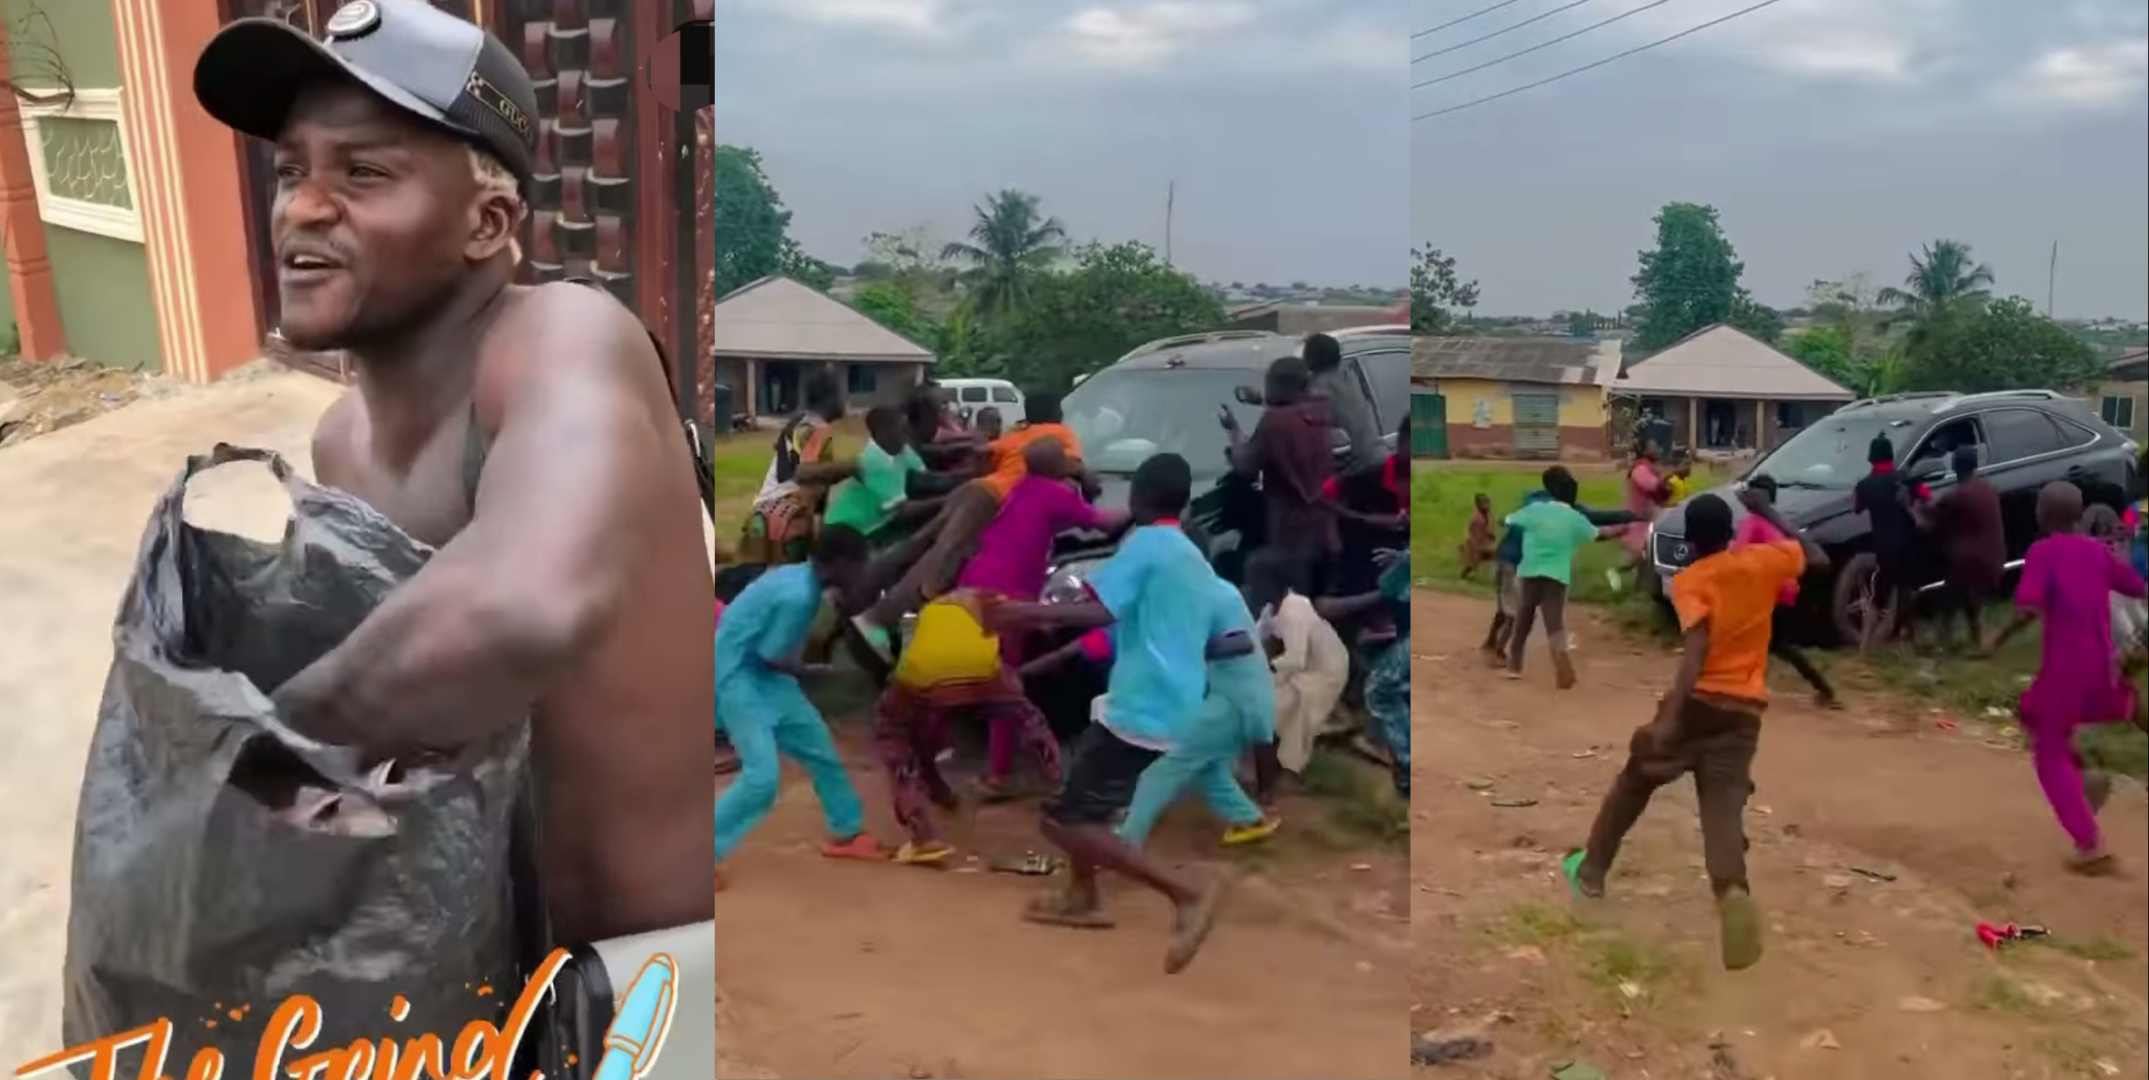 “I regularly spray N2 million to the streets, many artists no fit” – Portable brags as he shows love to locals (Video)